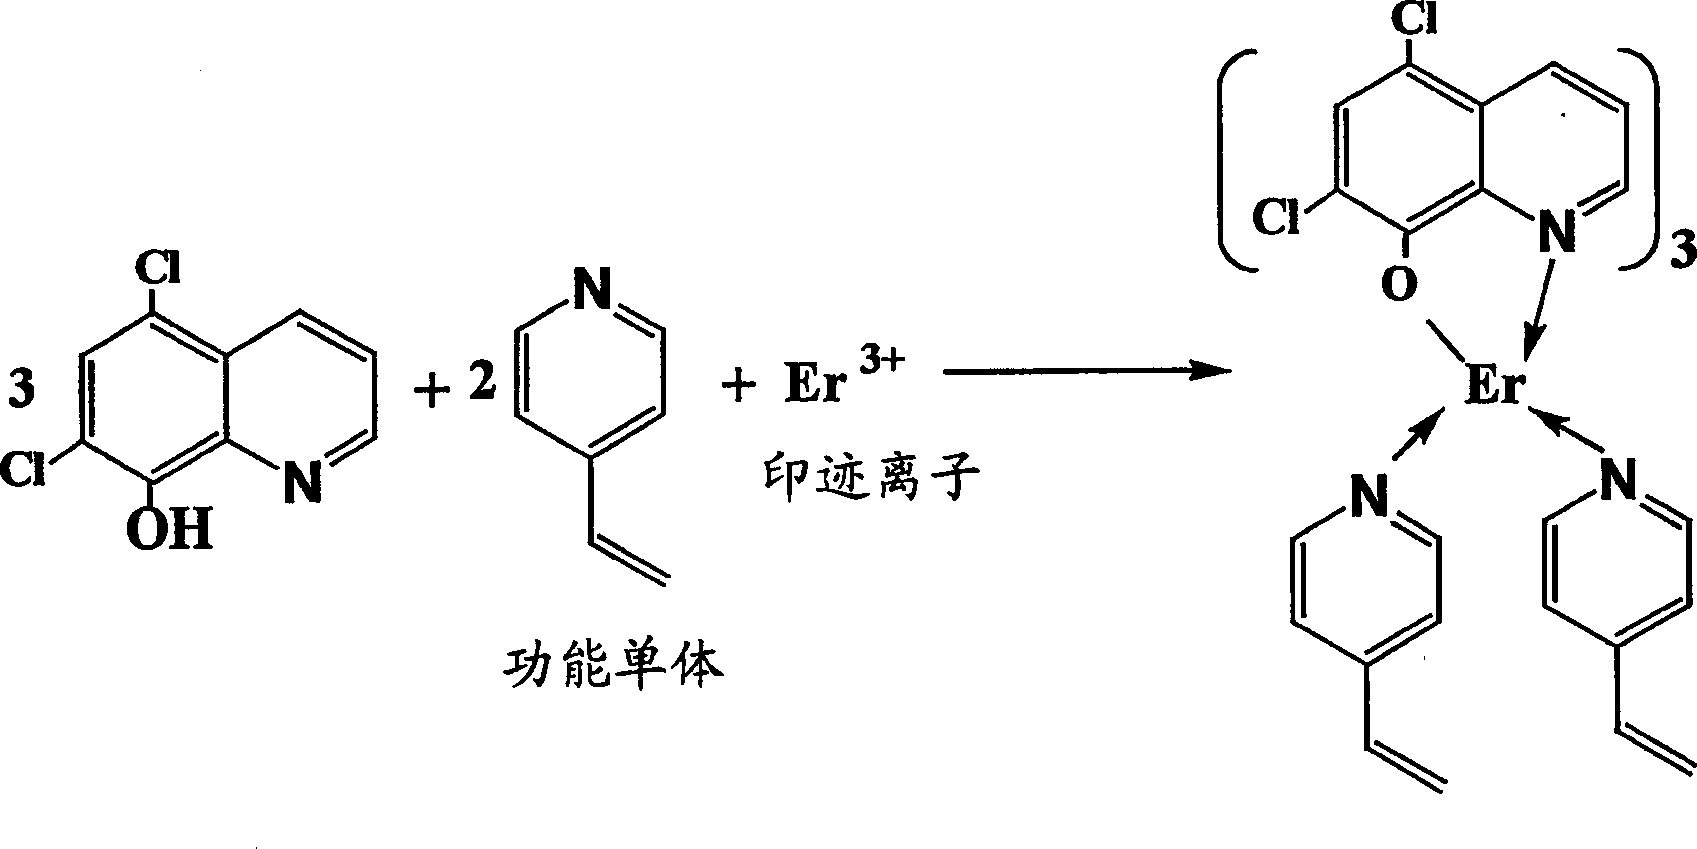 Synthesis of ion imprinted polymer particles